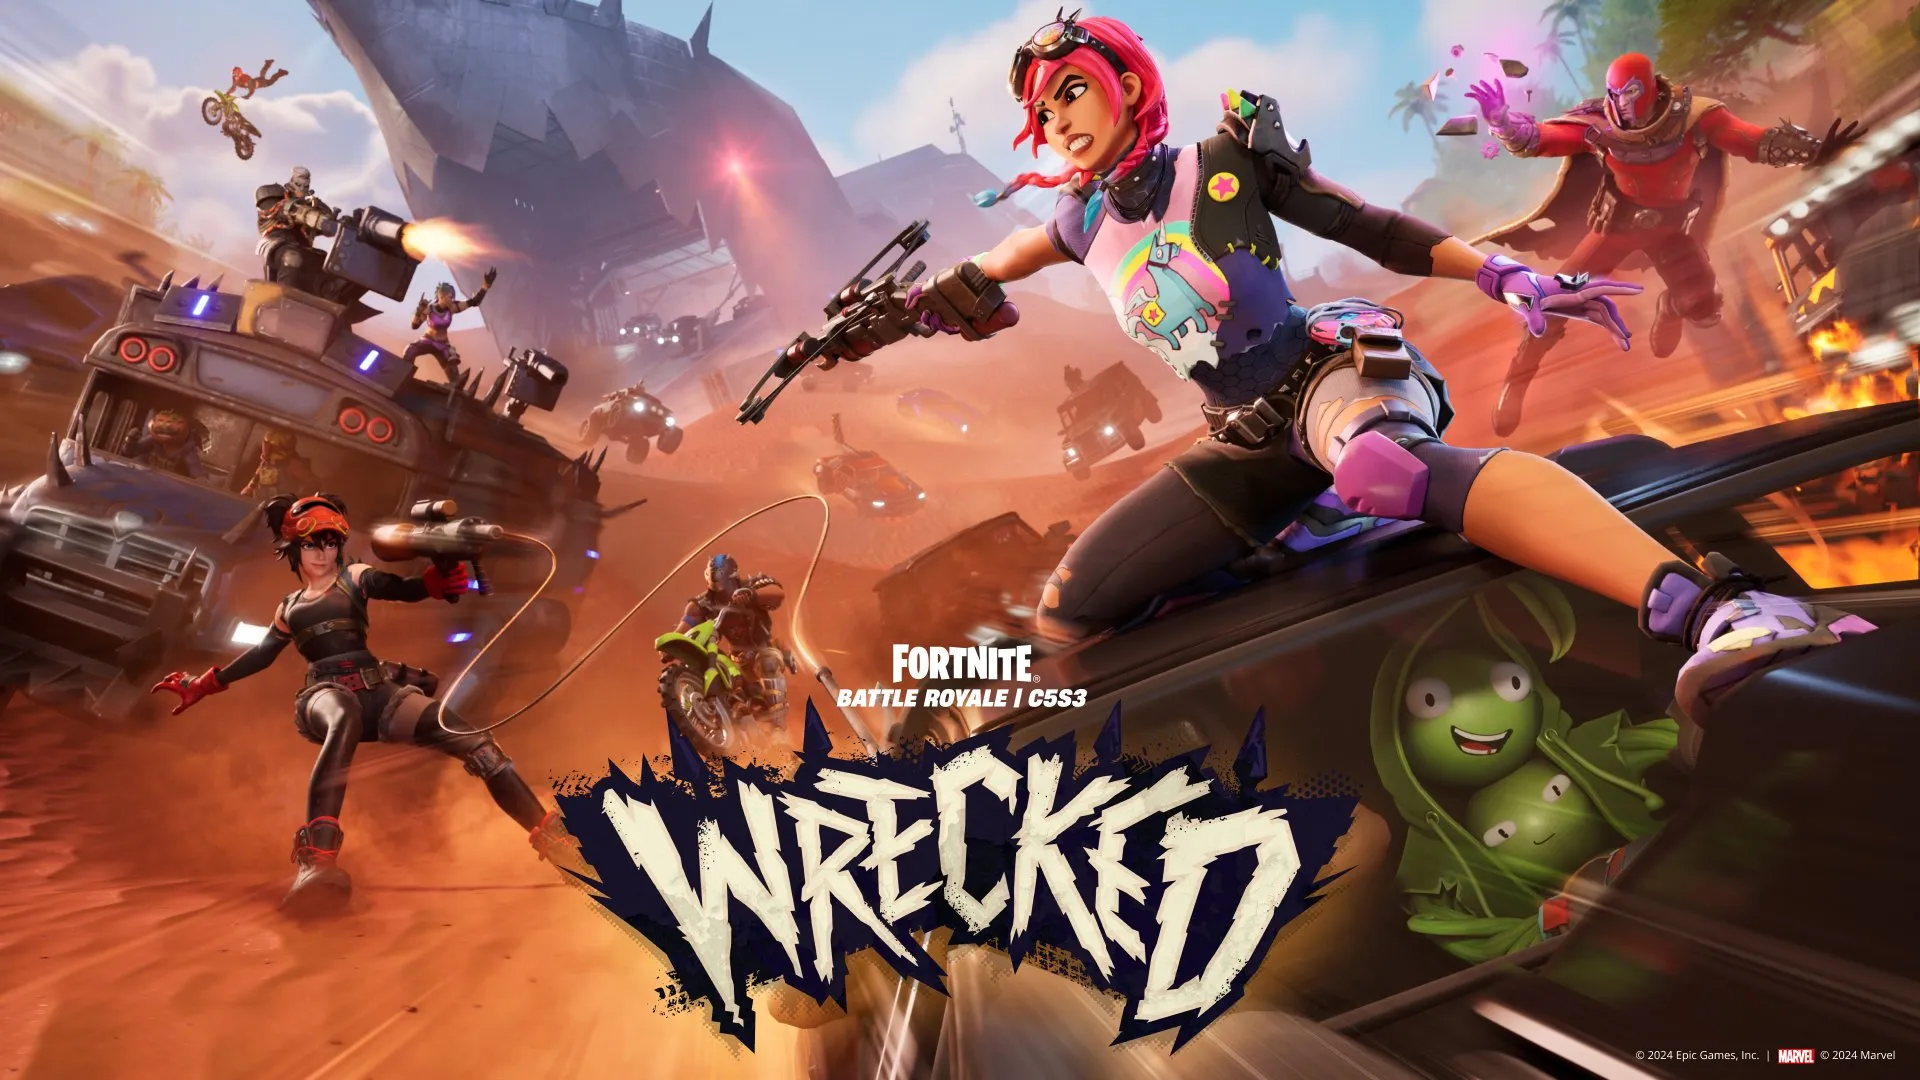 Fortnite: Wrecked. Image: Epic Games